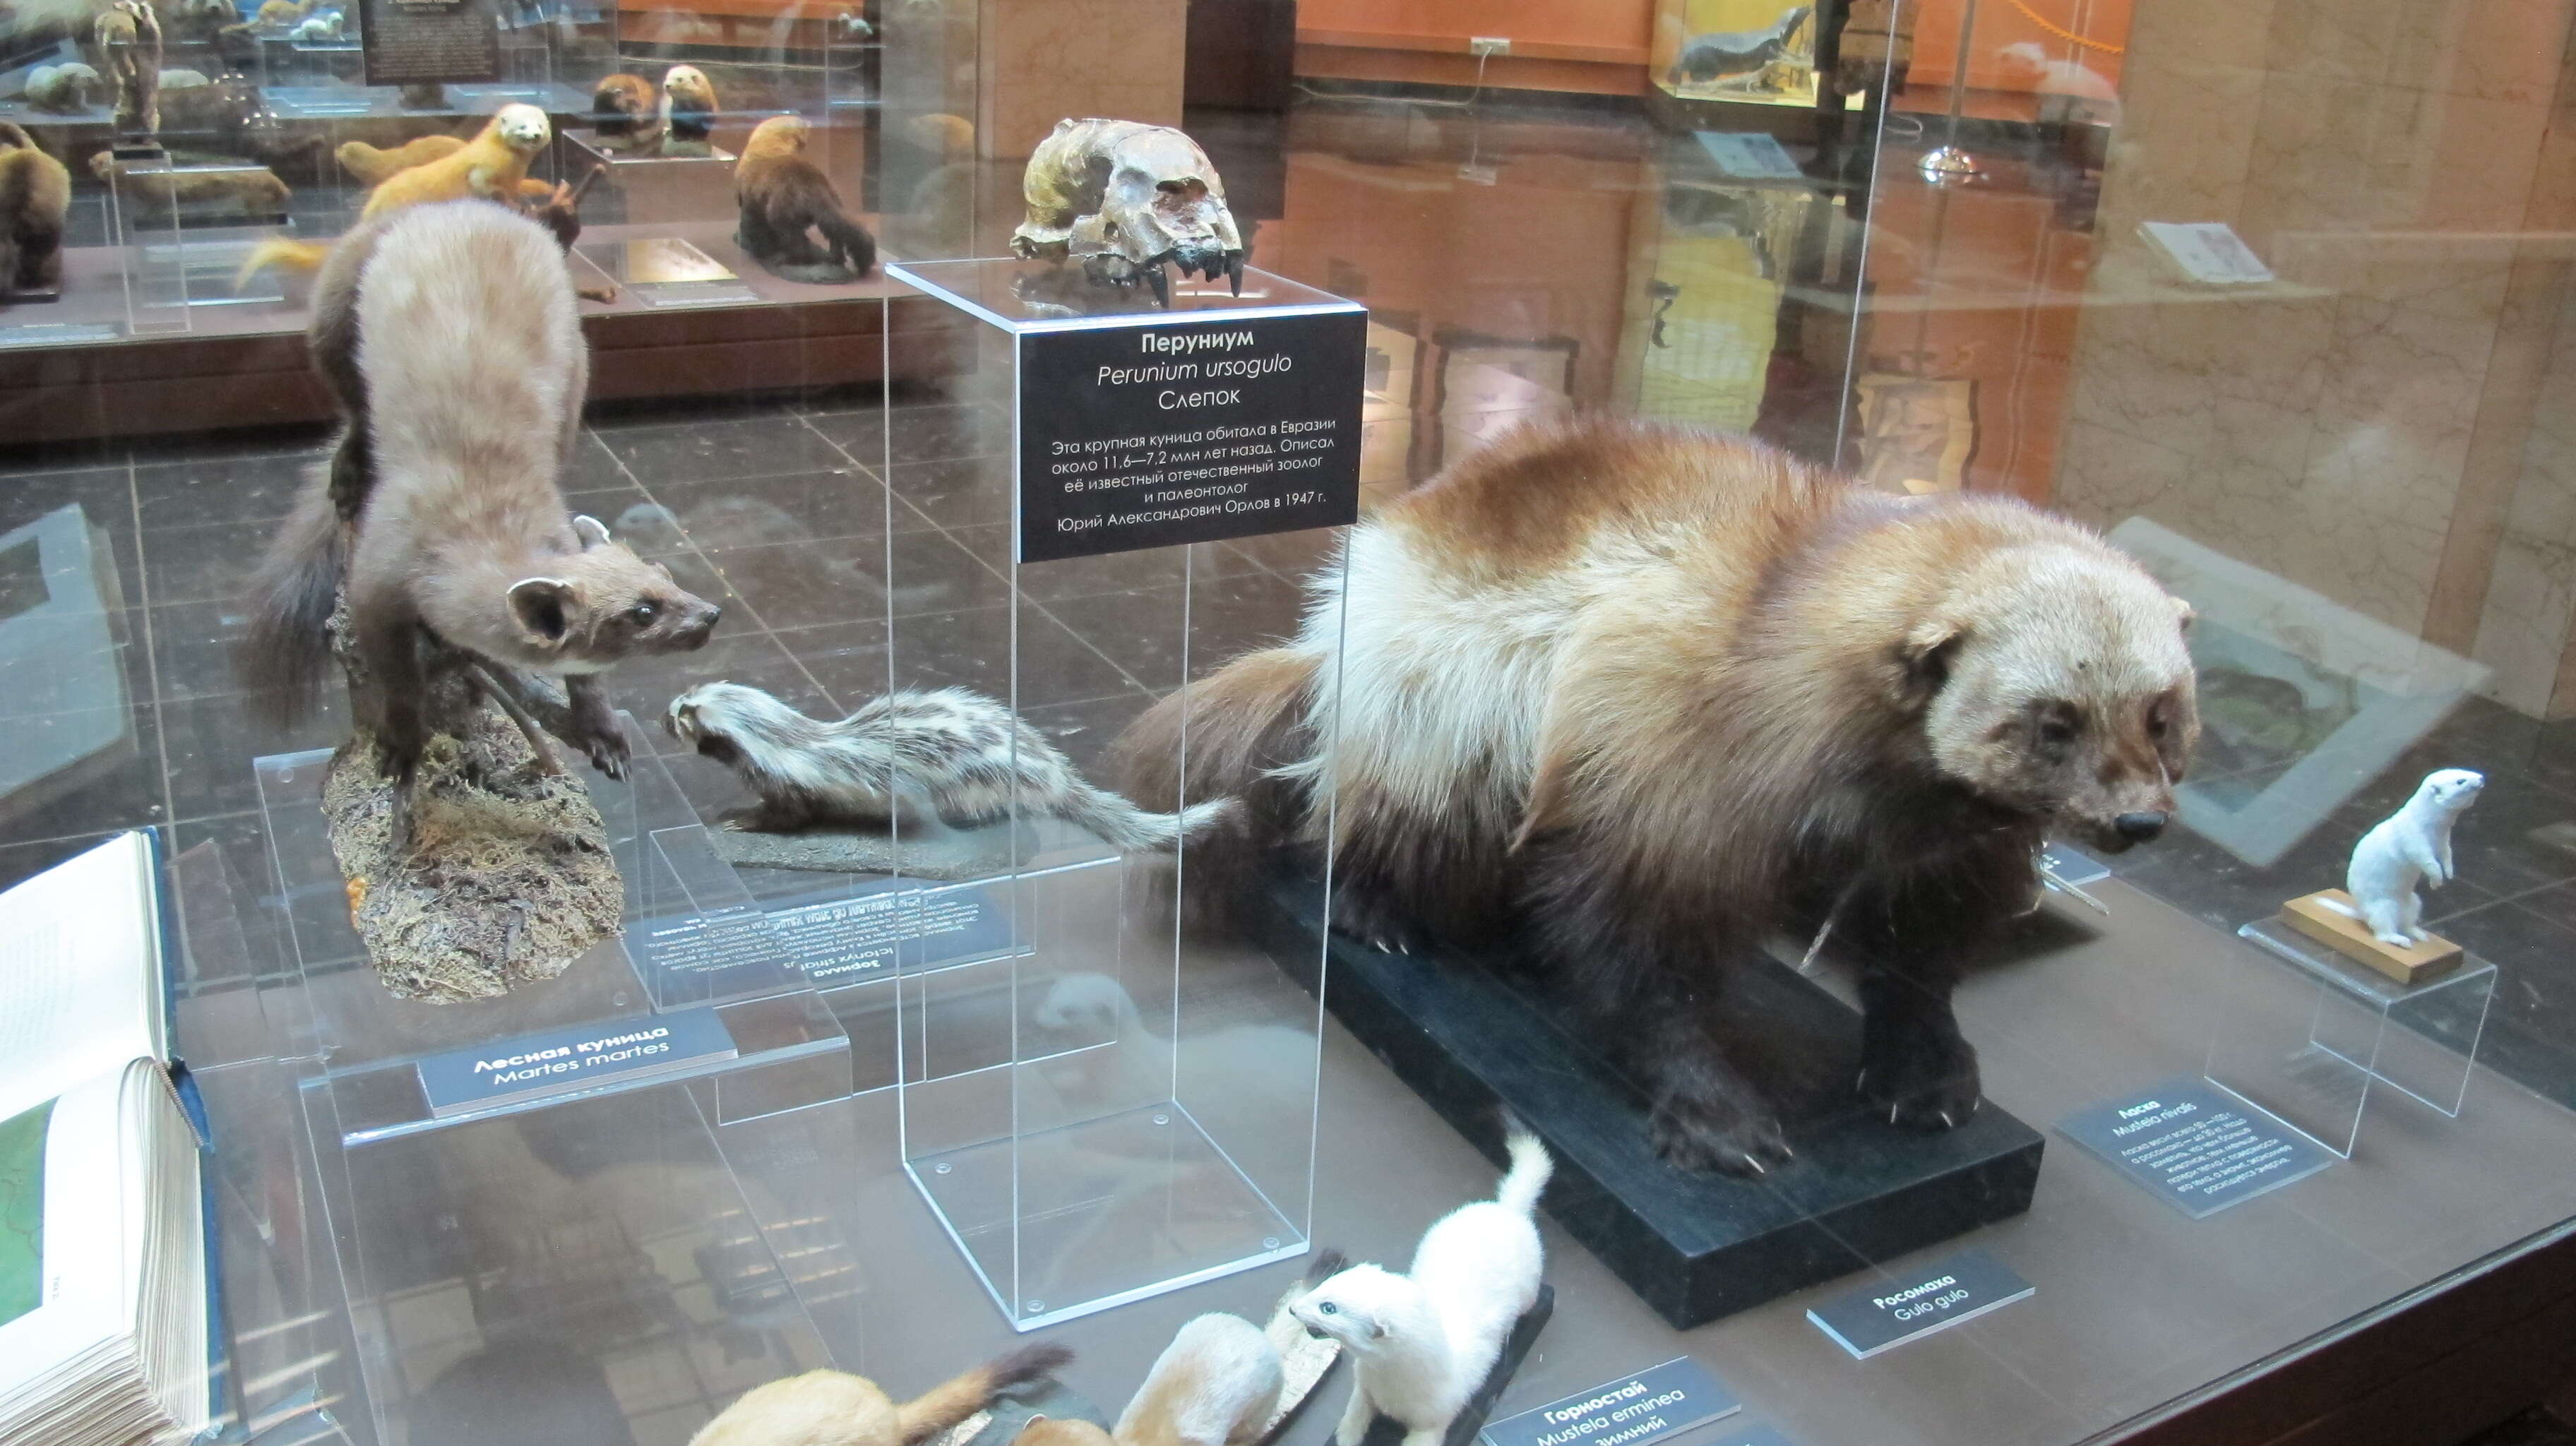 Image of badgers, otters, weasels, and relatives